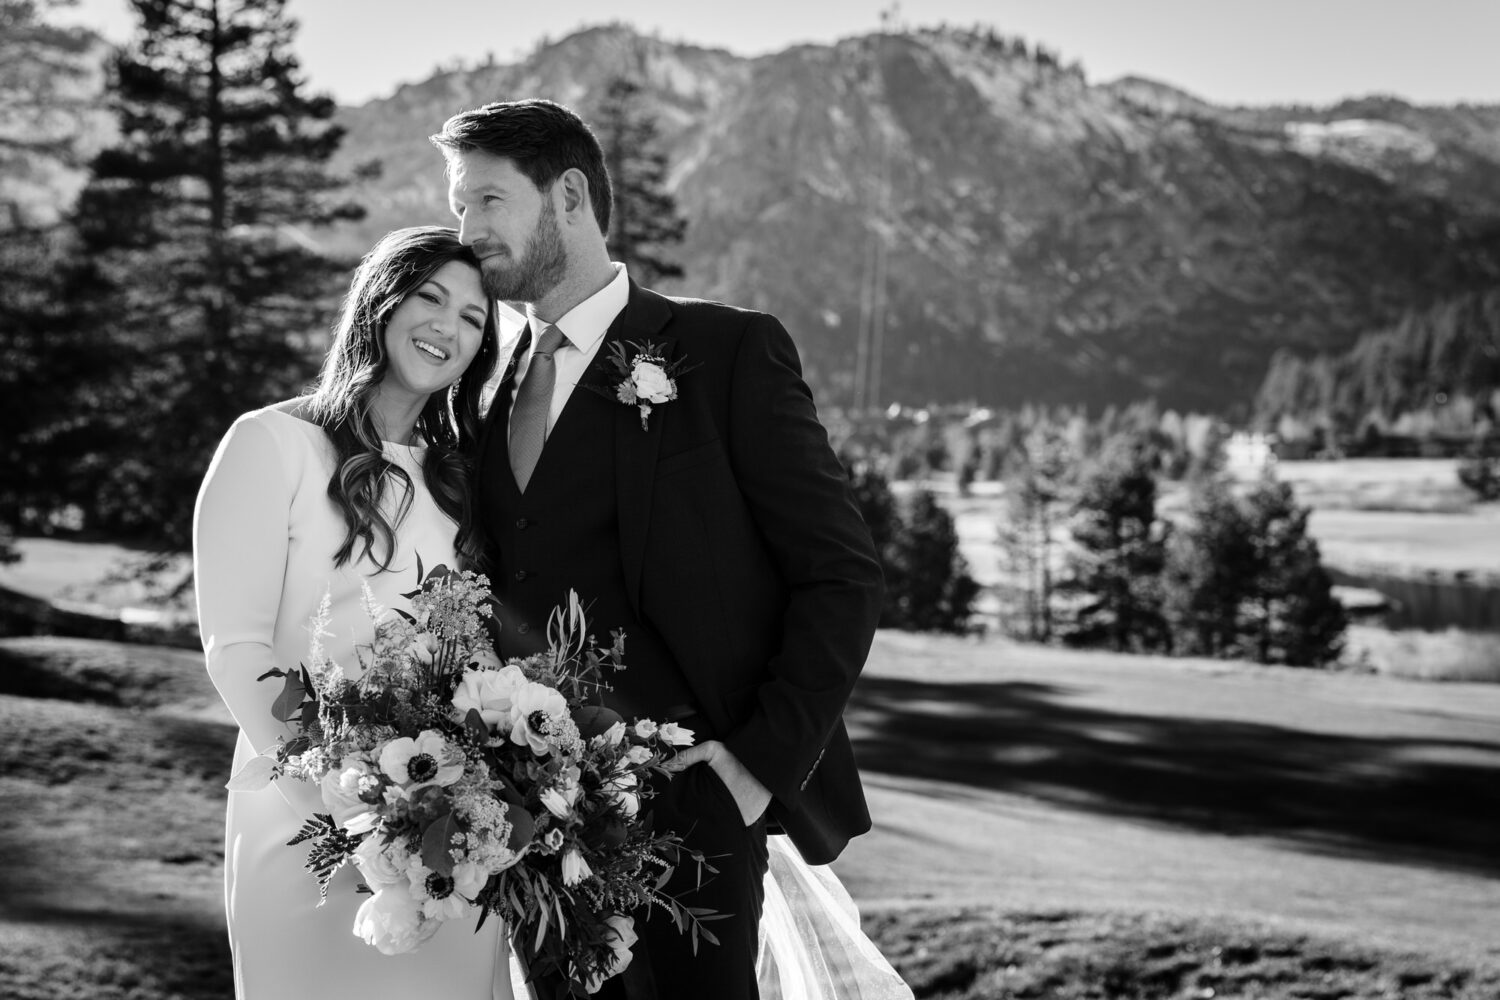 A bride and groom that decided to get married at Everline Resort & Spa enjoy a romantic moment together in Olympic Valley.